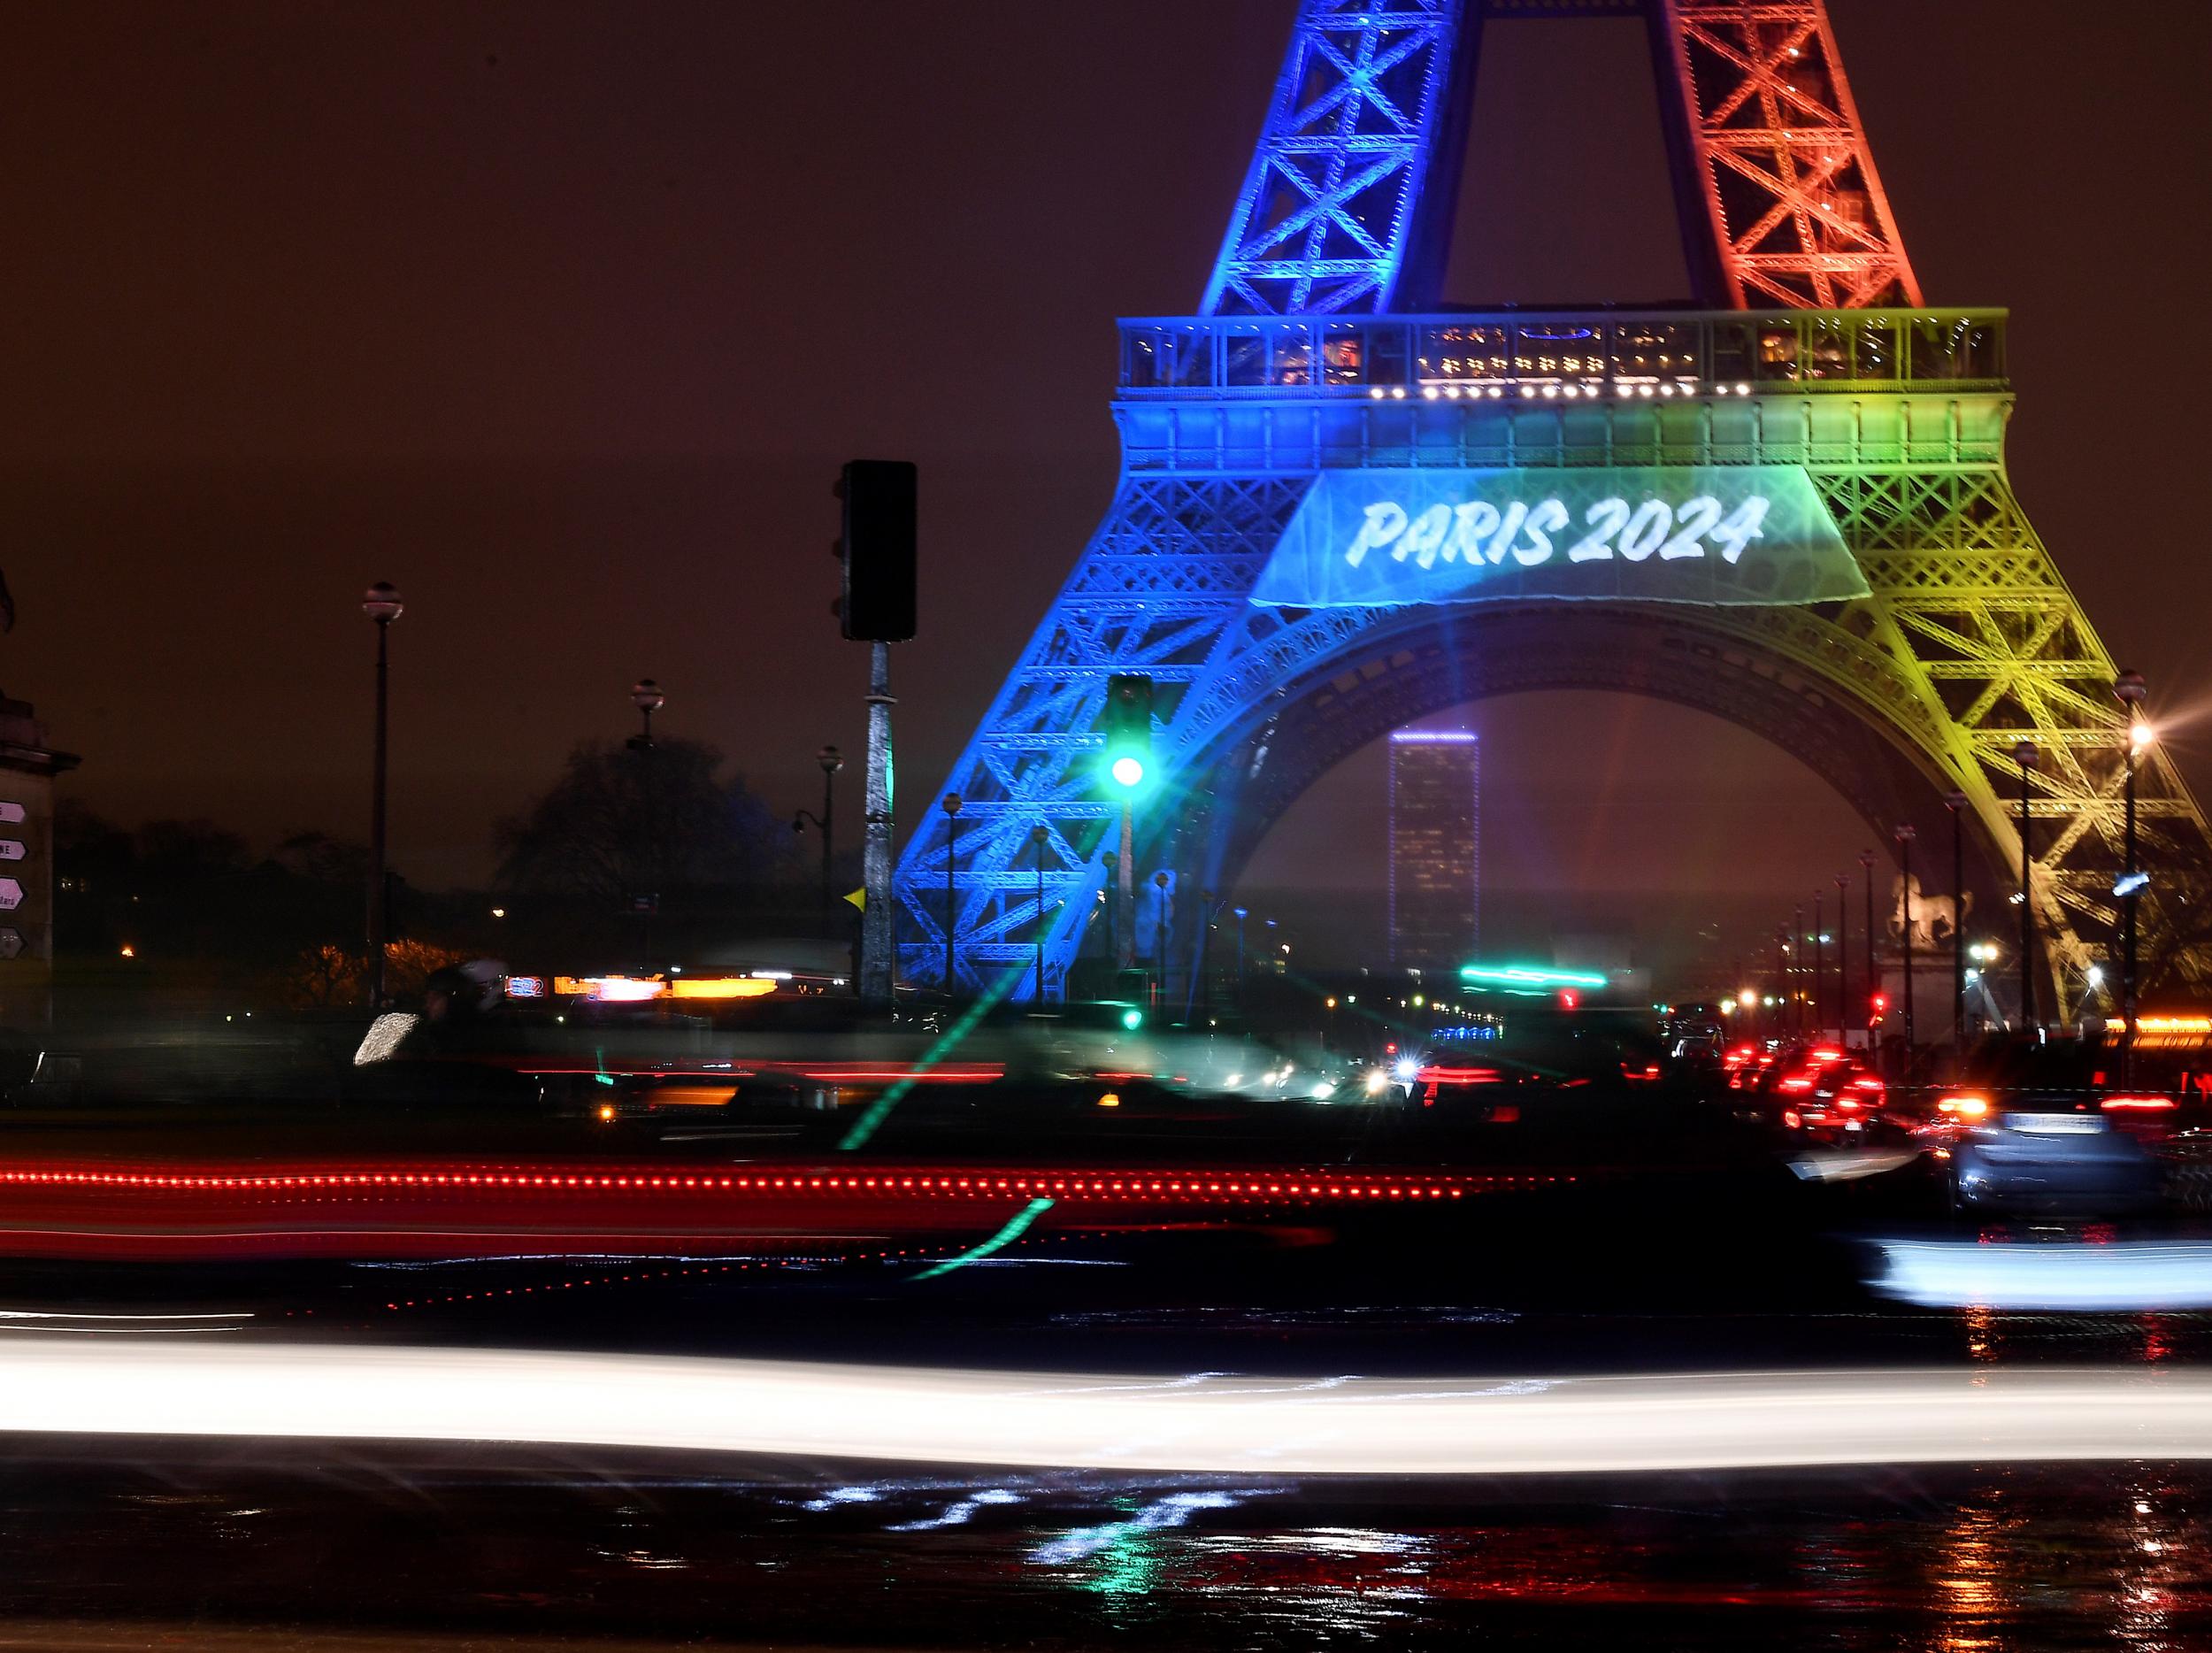 Paris to stage 2024 Summer Olympic Games with Los Angeles lined up to